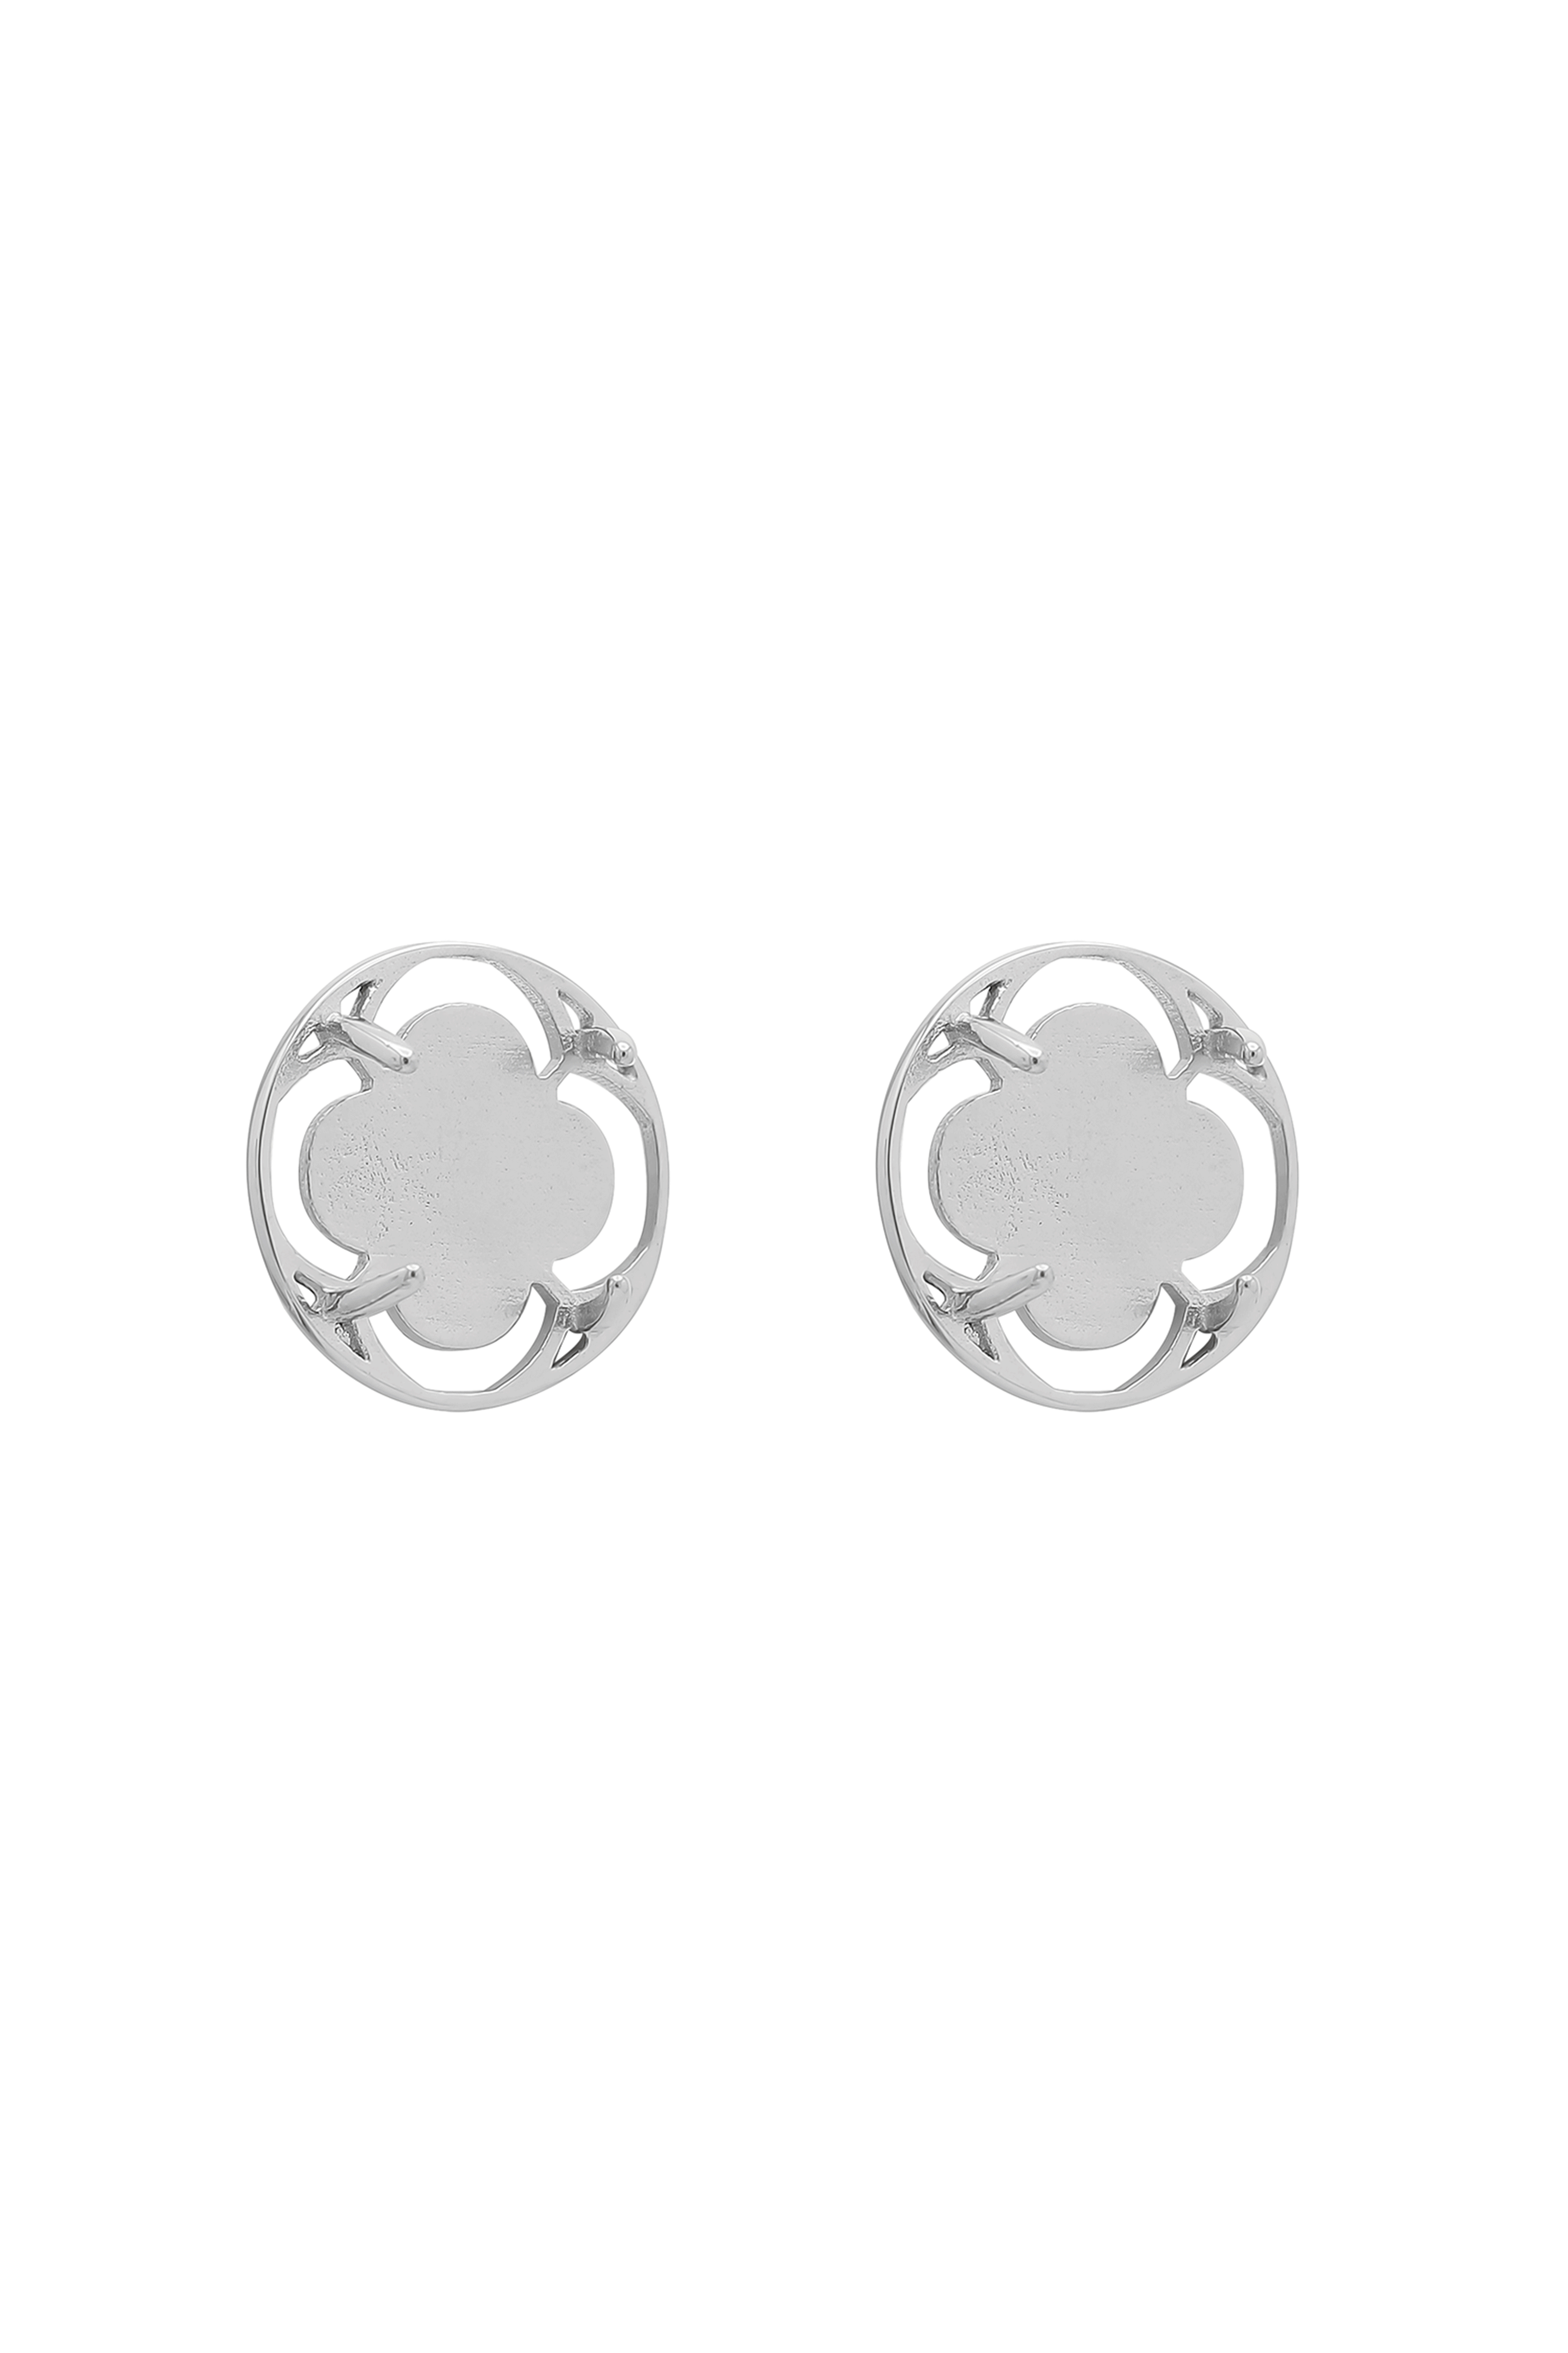 Stone Station Stud Earring Set Silver Coloured